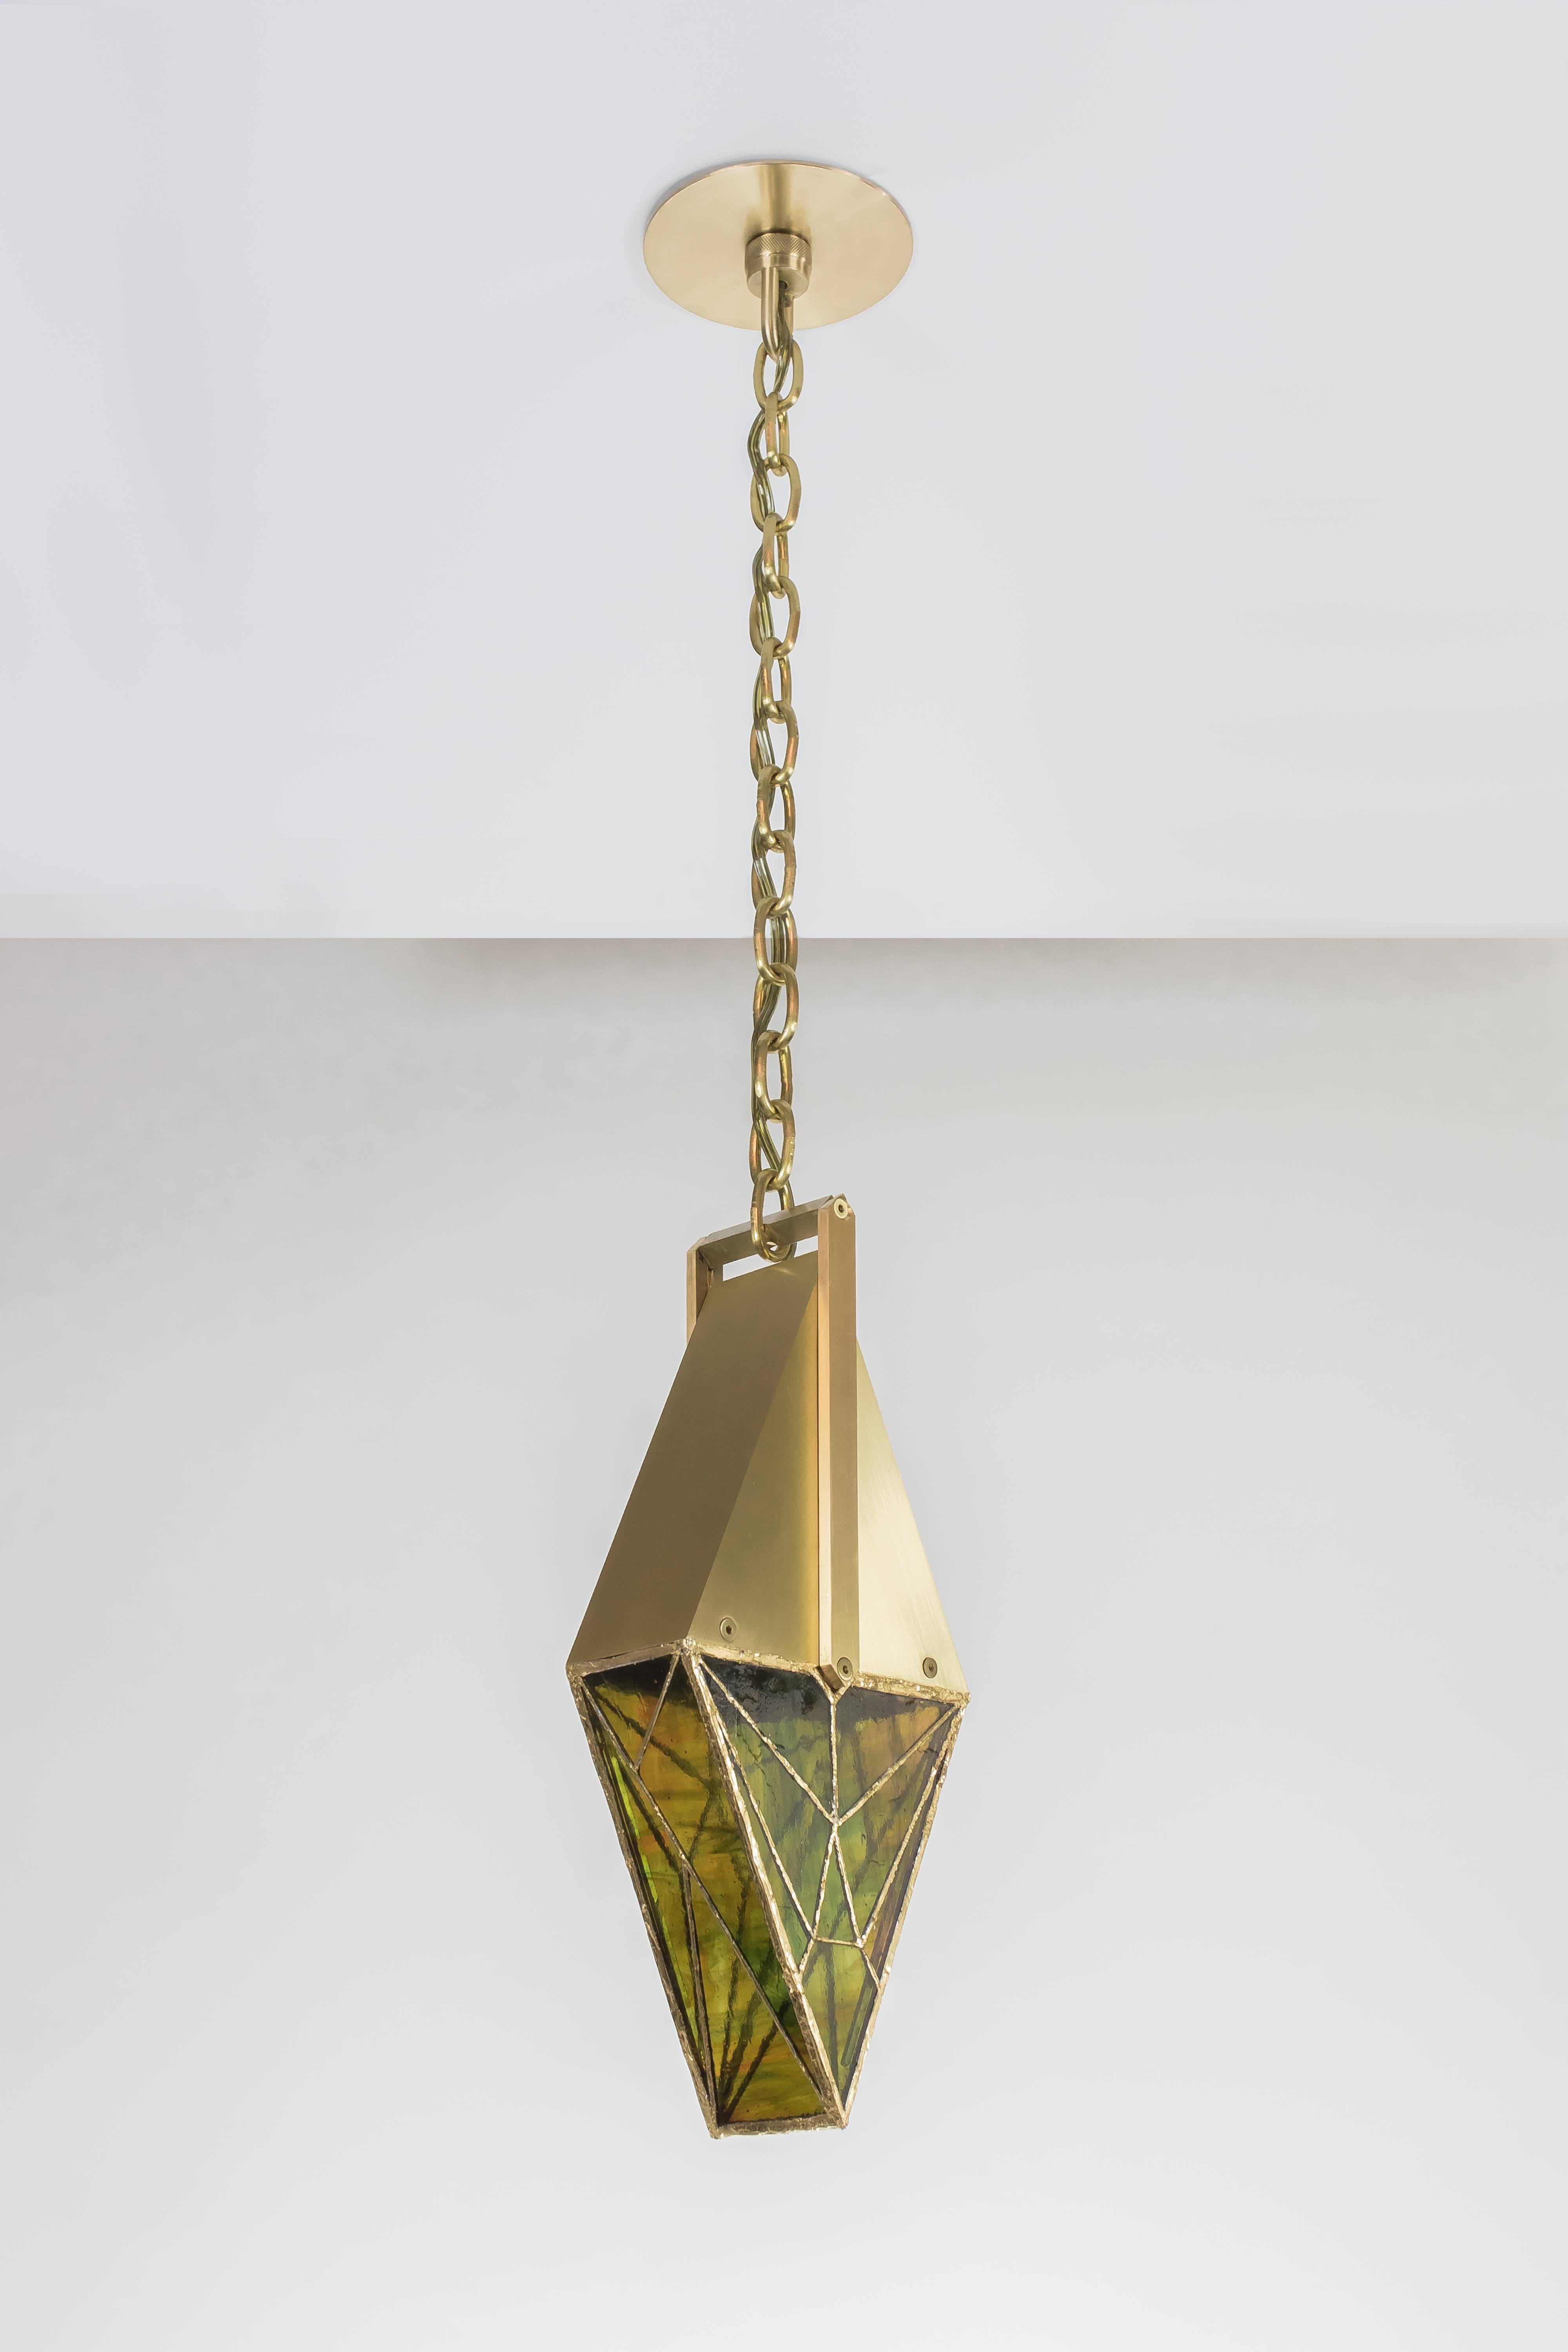 Brushed Trilliant, Brass and Stained Glass Contemporary Pendant by Kalin Asenov, 2016 For Sale